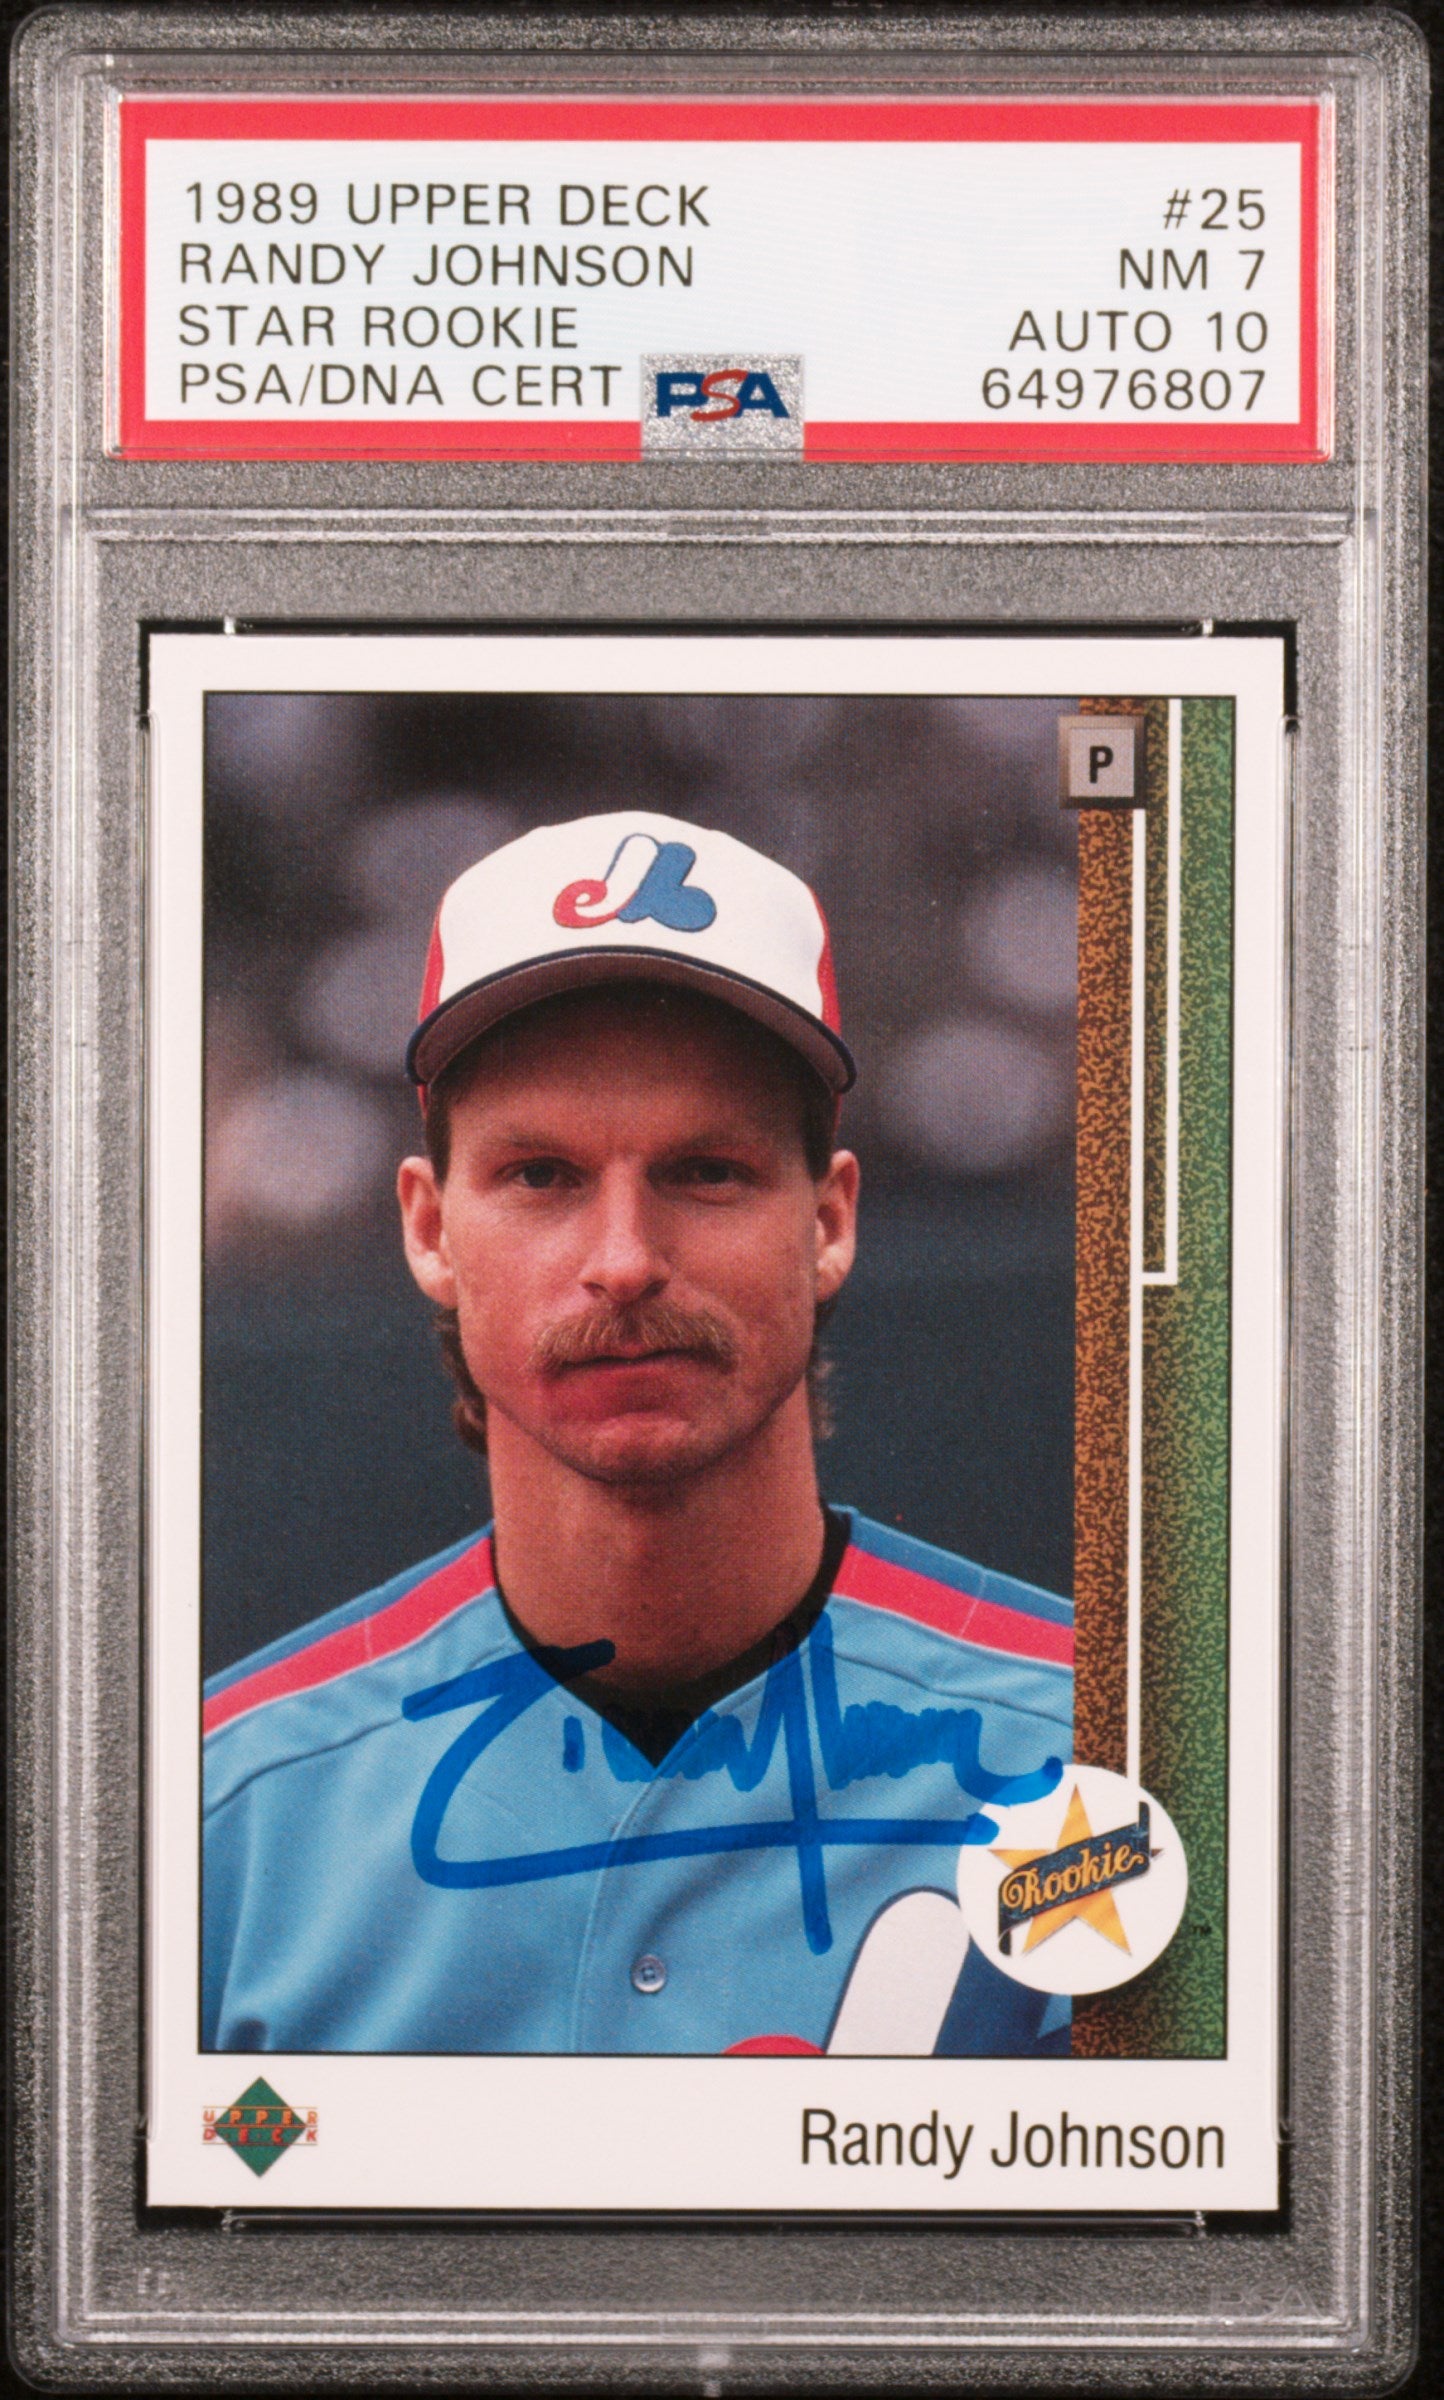 Randy Johnson 1989 Upper Deck Star Signed Rookie Card #25 Auto Graded